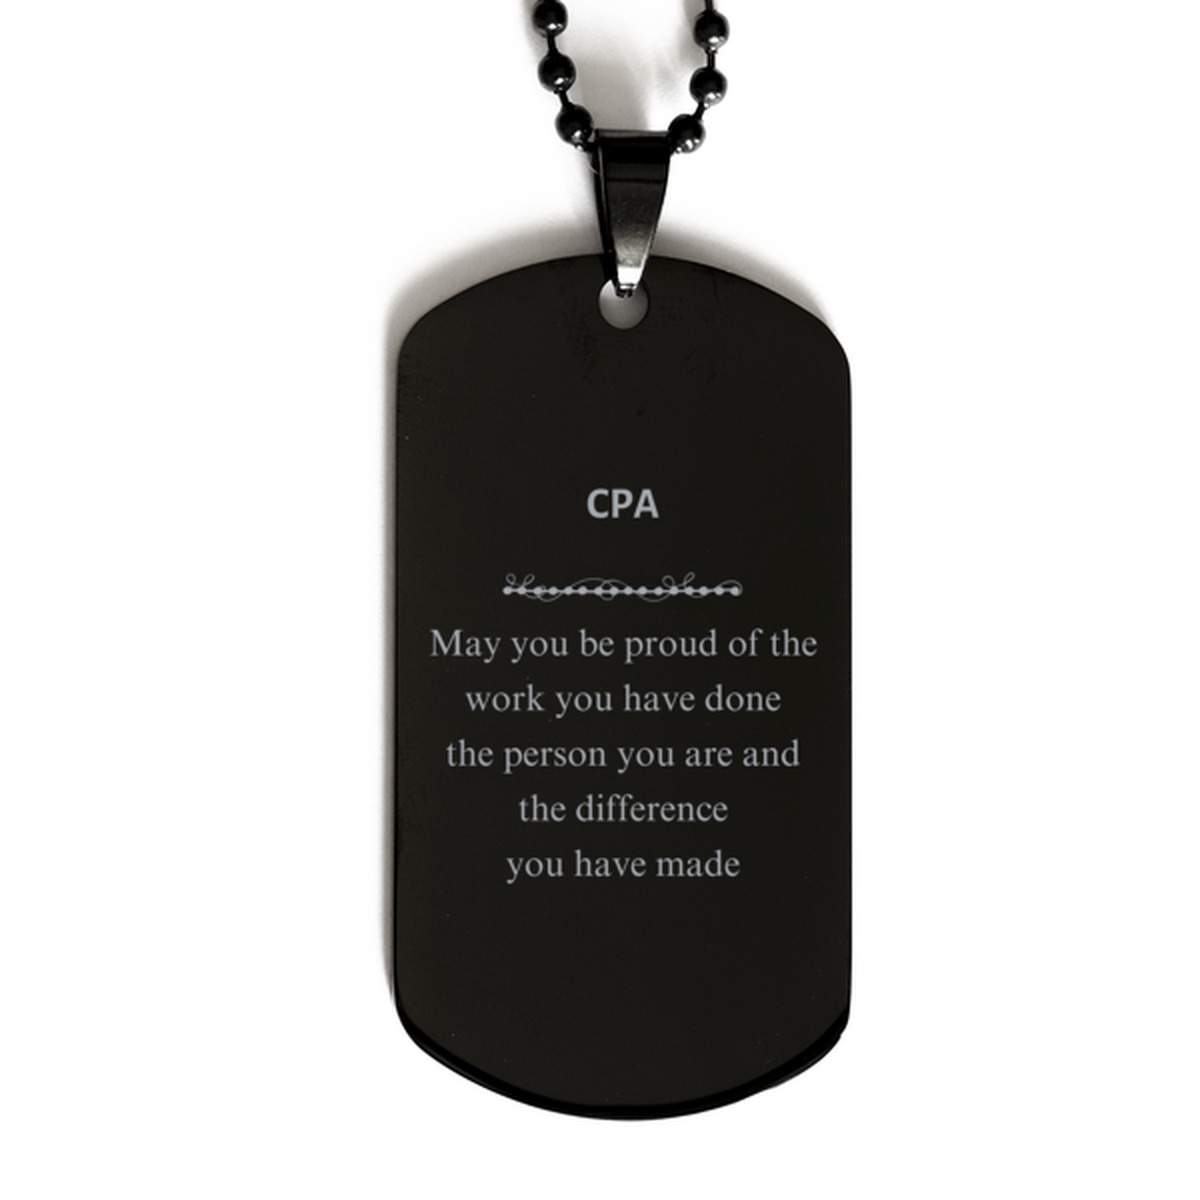 CPA May you be proud of the work you have done, Retirement CPA Black Dog Tag for Colleague Appreciation Gifts Amazing for CPA